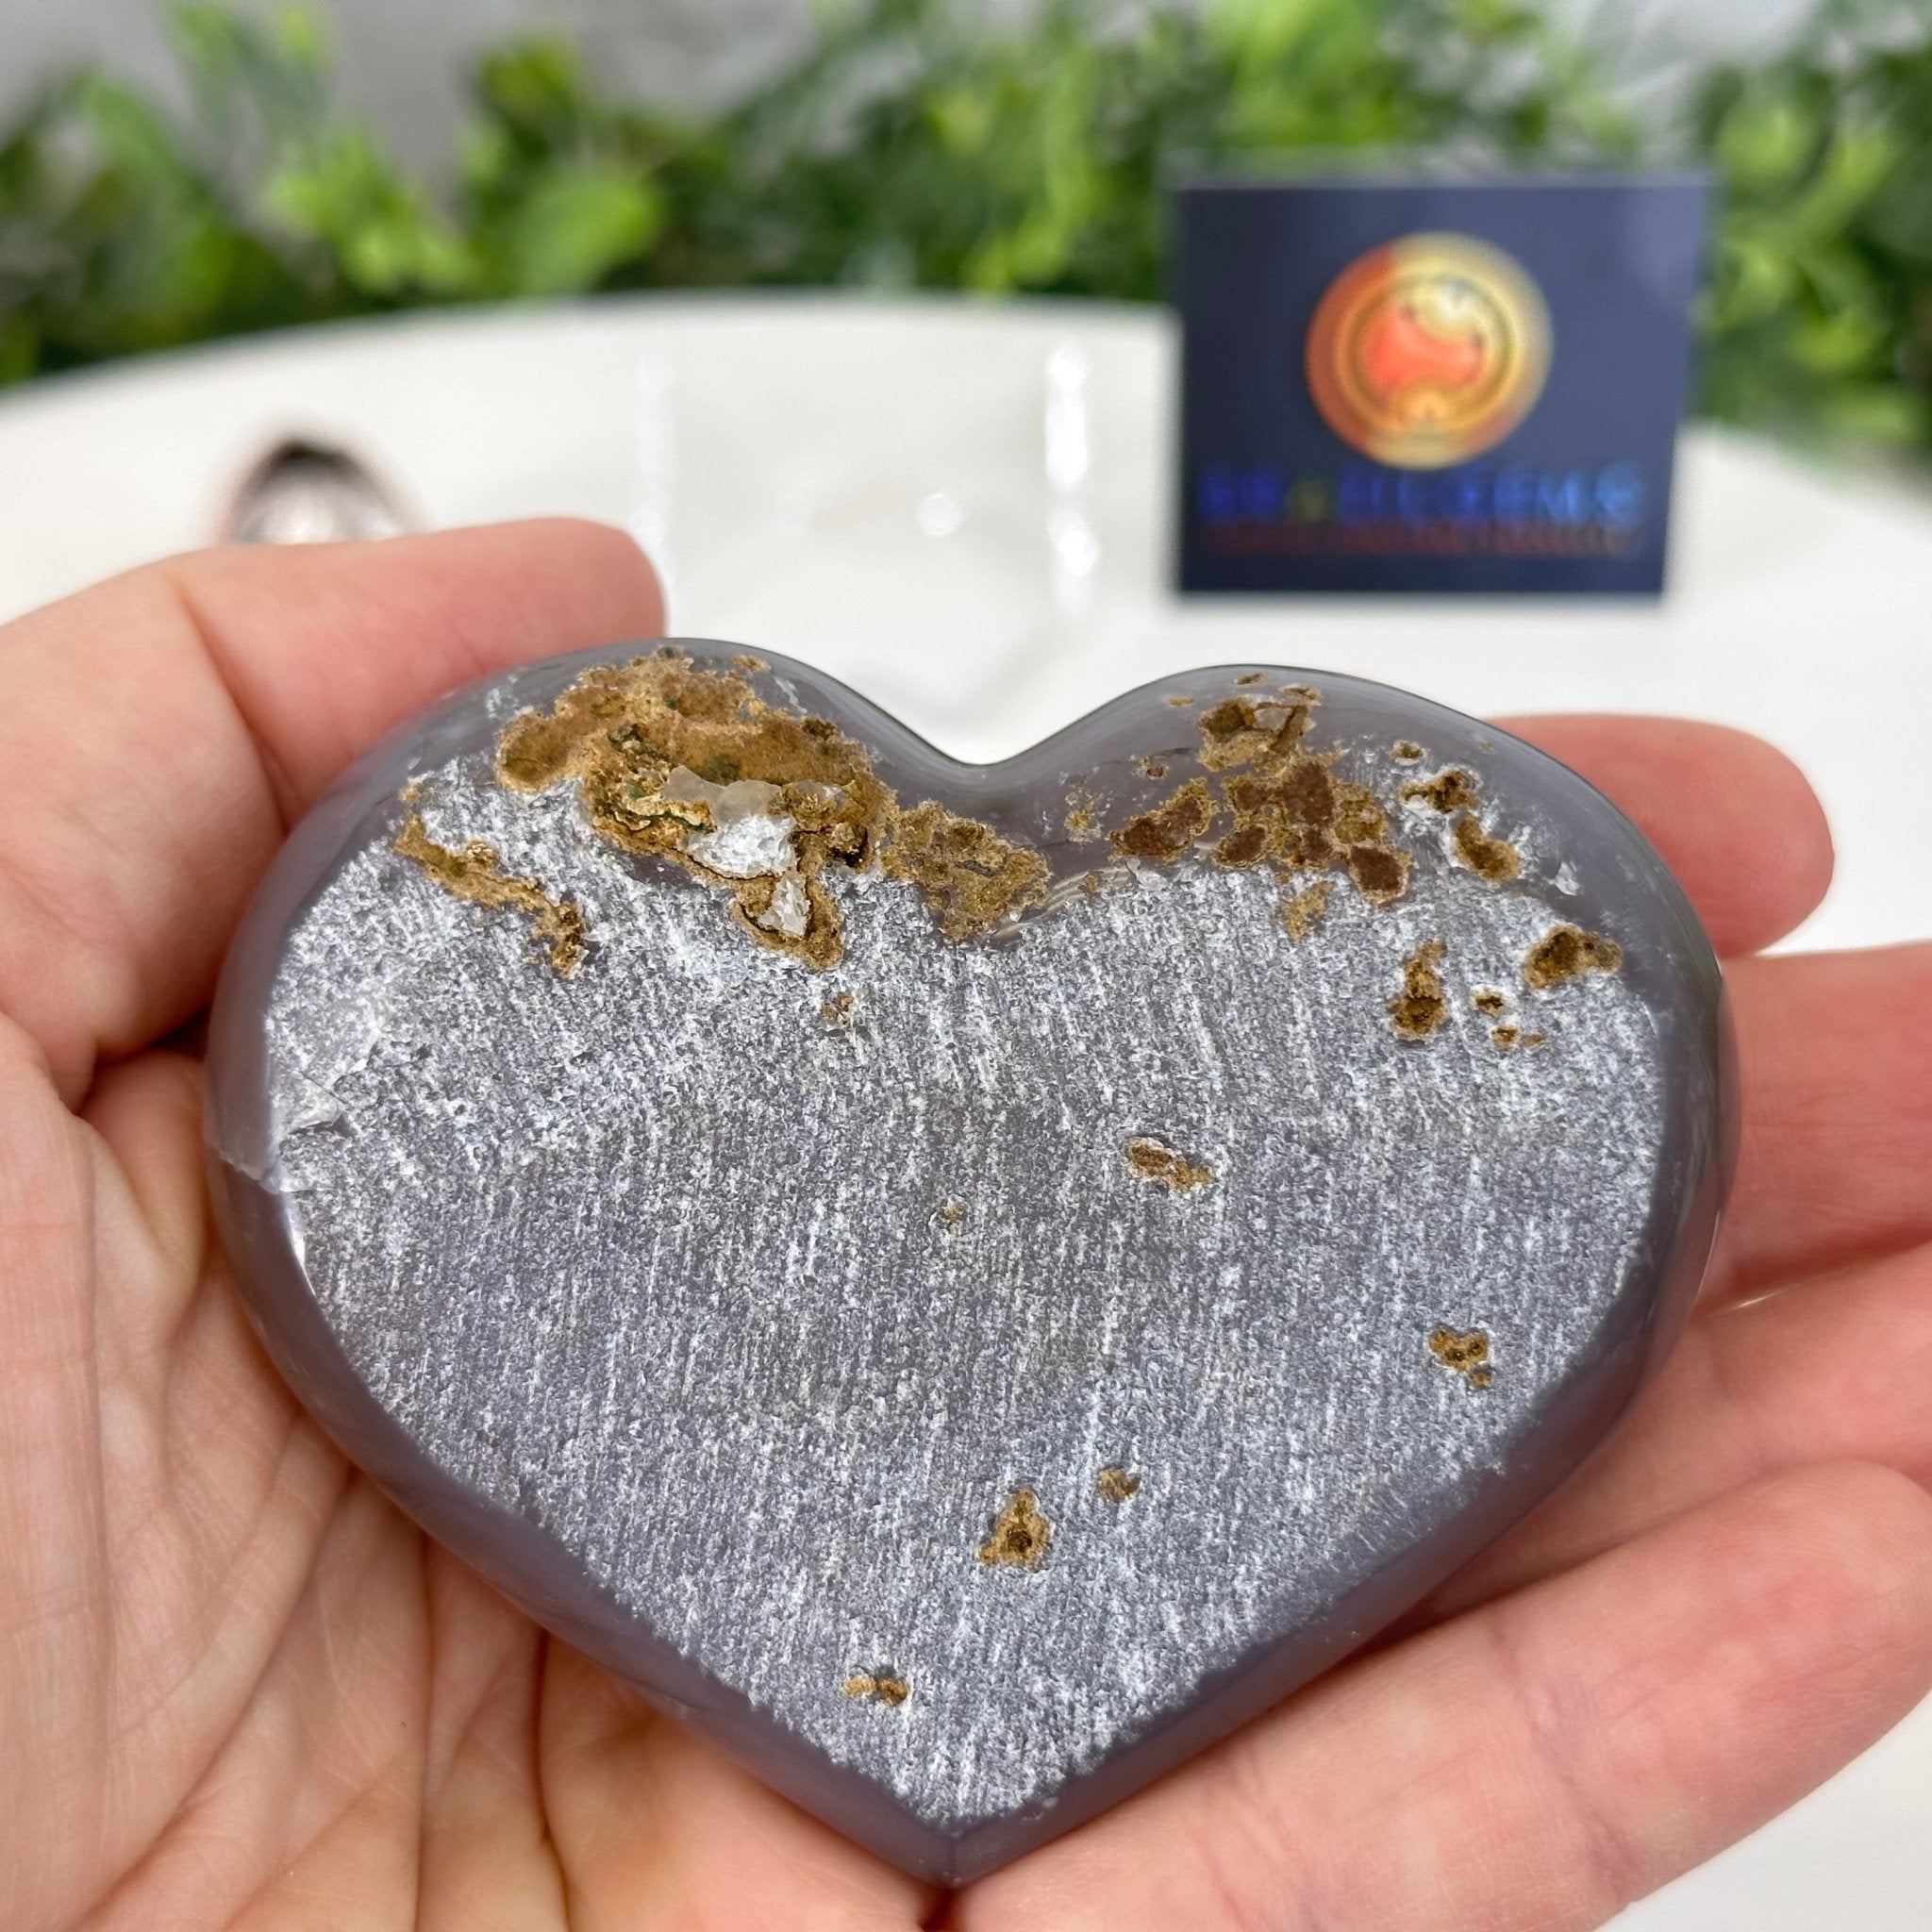 Extra Quality Amethyst Heart Geode on an Acrylic Stand, 0.37 lbs & 2.3" Tall #5462-0030 by Brazil Gems - Brazil GemsBrazil GemsExtra Quality Amethyst Heart Geode on an Acrylic Stand, 0.37 lbs & 2.3" Tall #5462-0030 by Brazil GemsHearts5462-0030